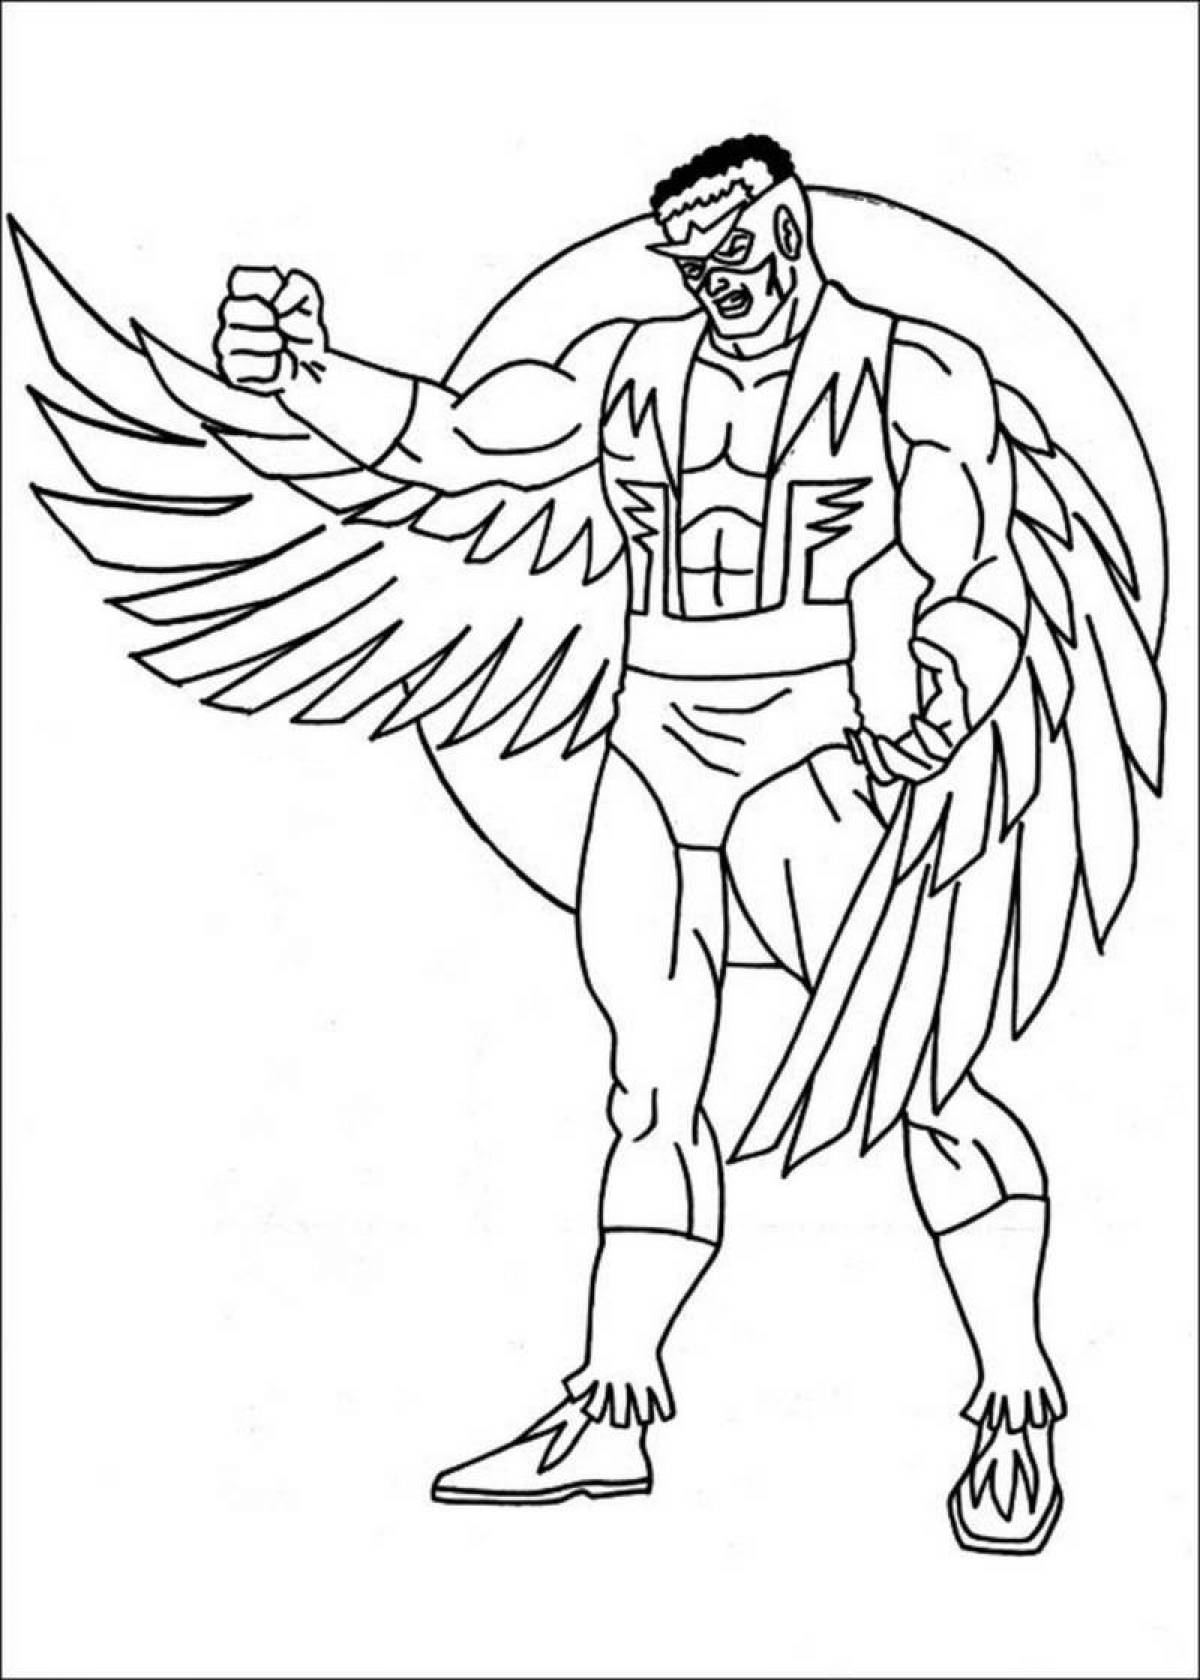 Happy wednesday coloring page